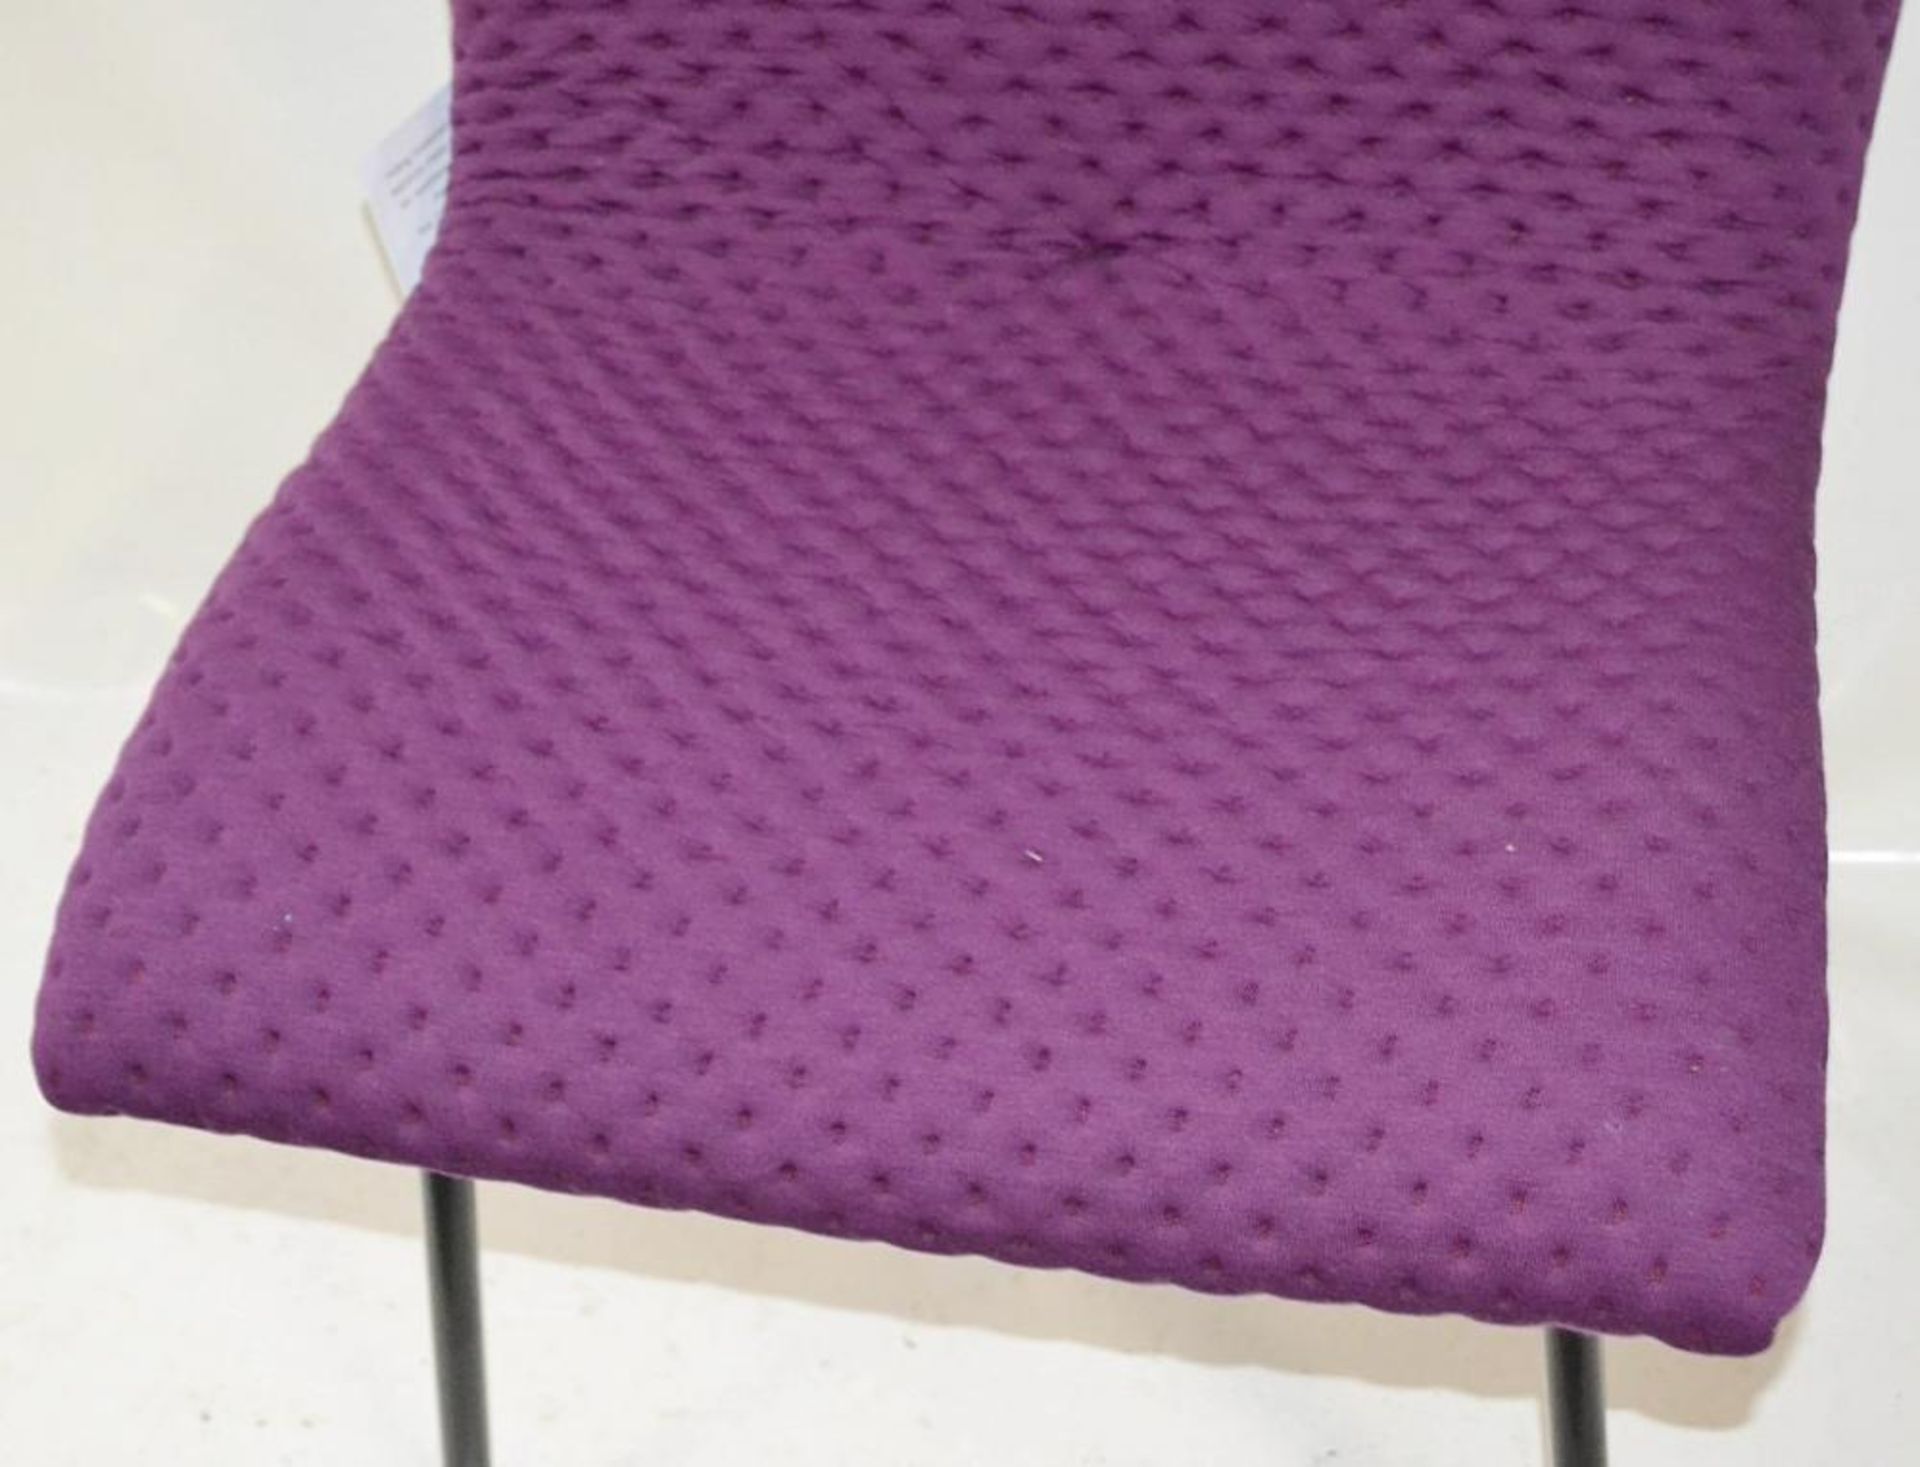 1 x Ligne Roset 'Calin' Chair - Features Bright Purple Upholsterey - Made In France - Ref: 6206608 P - Image 6 of 7